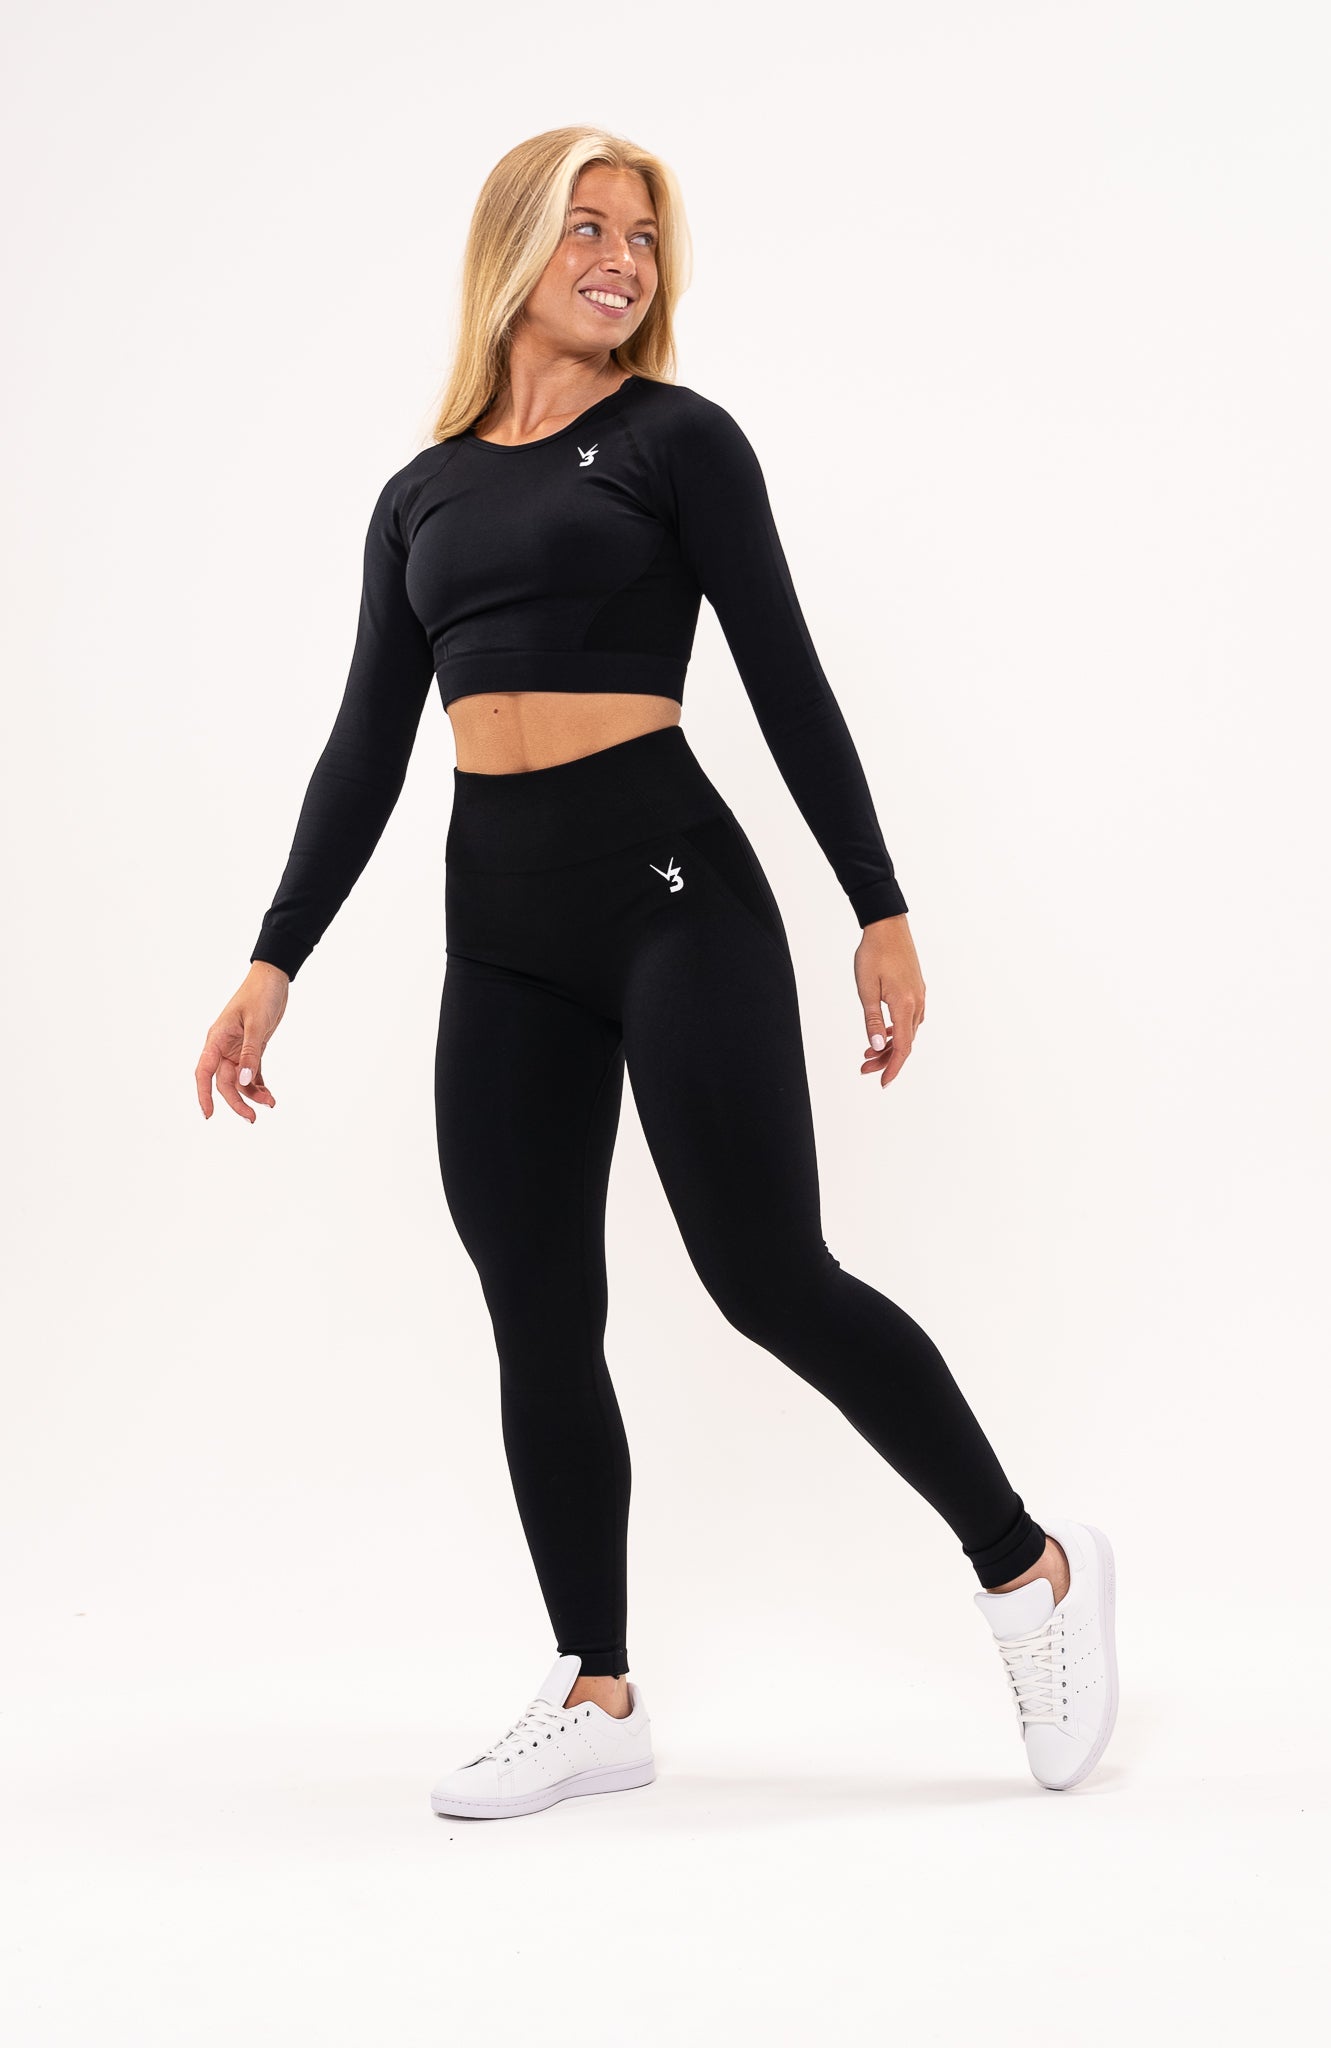 V3 Apparel Women's Tempo seamless long sleeve cropped training top in black with thumbhole long sleeves and crop fit for gym workouts training, Running, yoga, bodybuilding and bikini fitness.